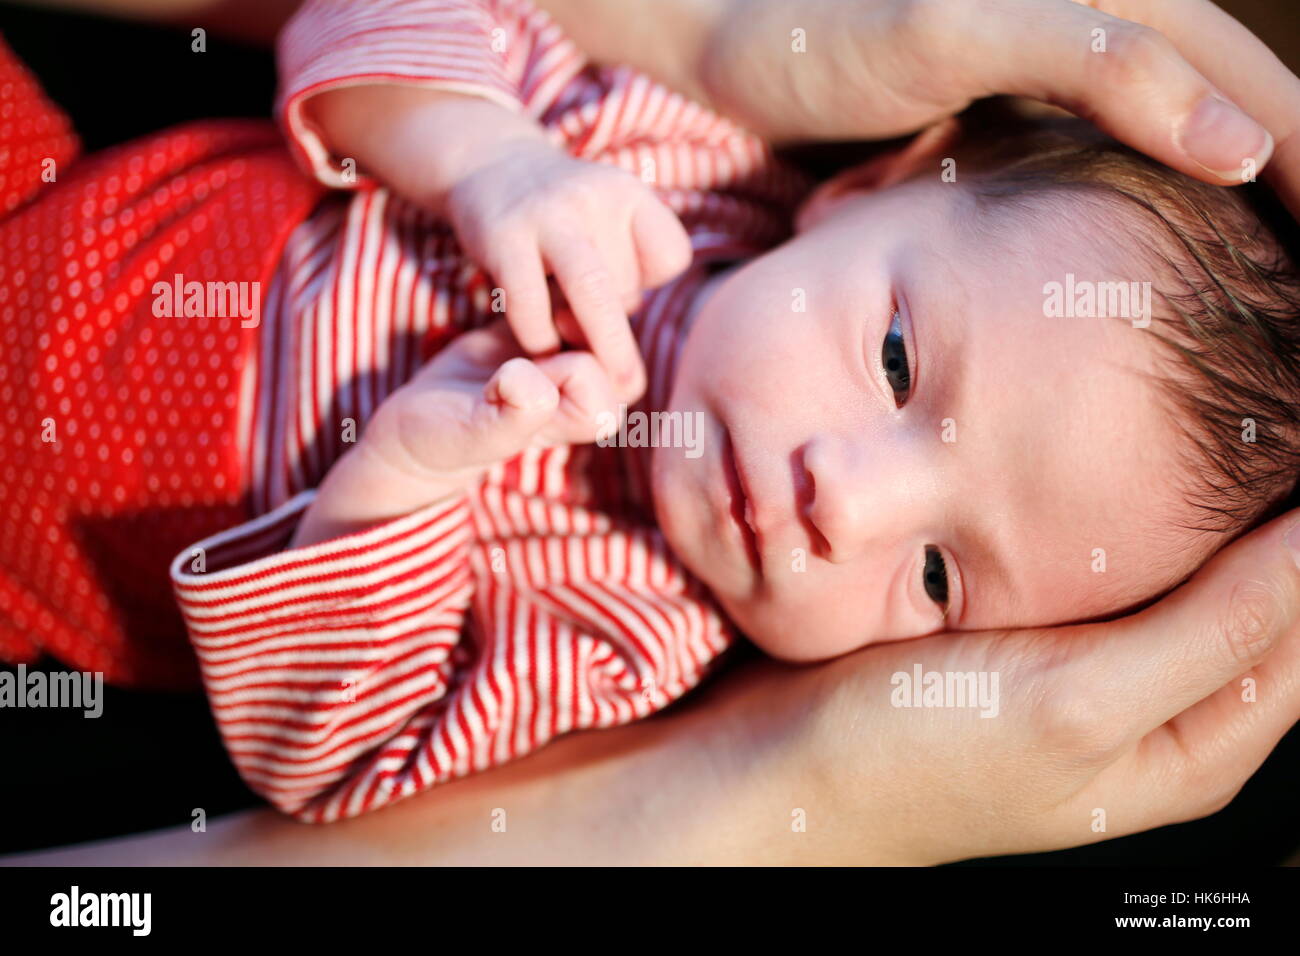 Two-week-old baby with hands of parents Stock Photo